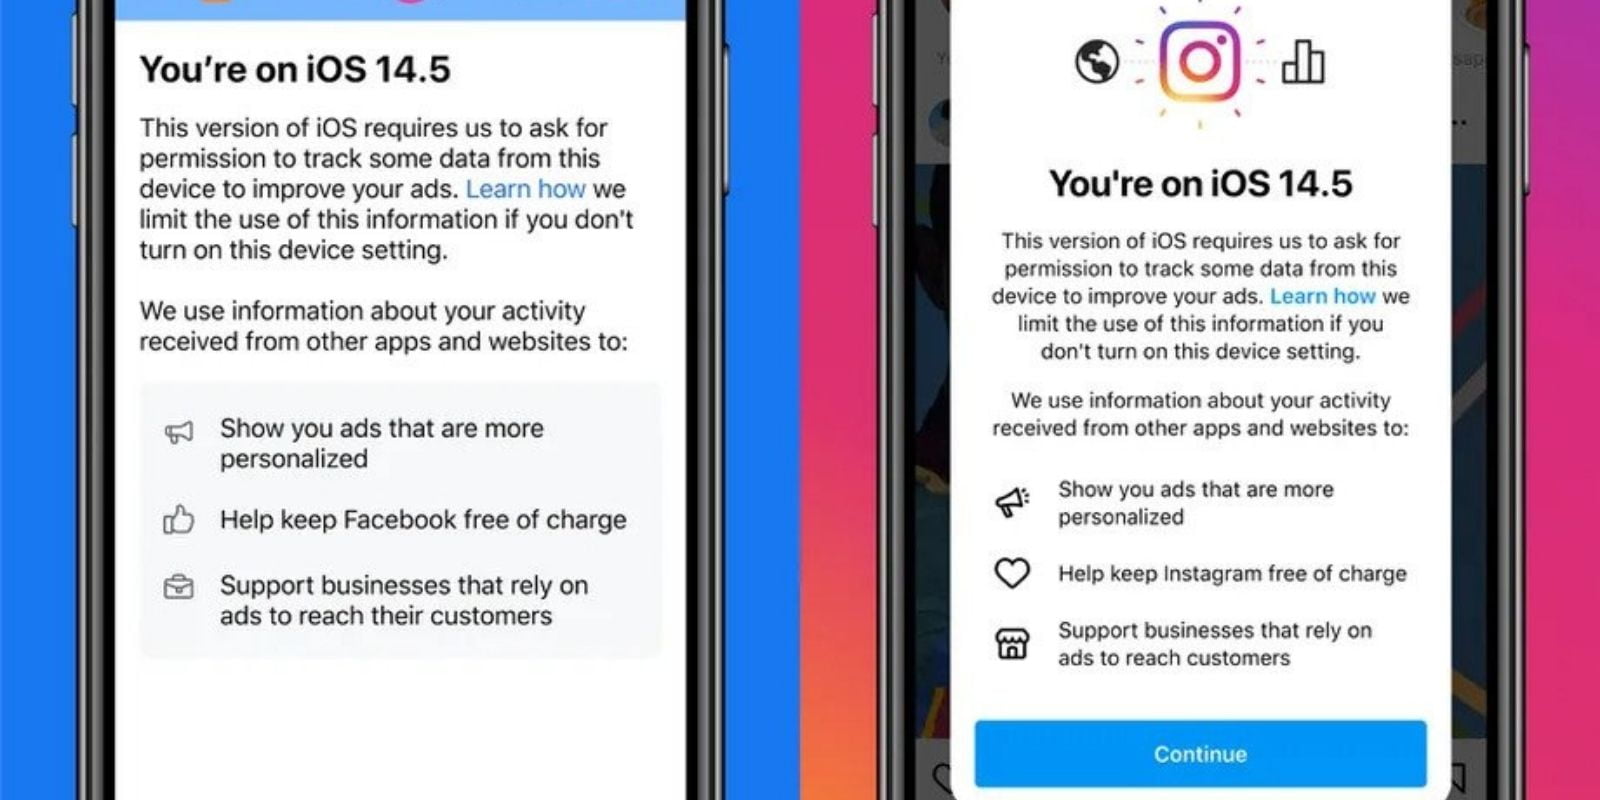 iOS notice pop-up appears on Instagram and Facebook's iOS apps